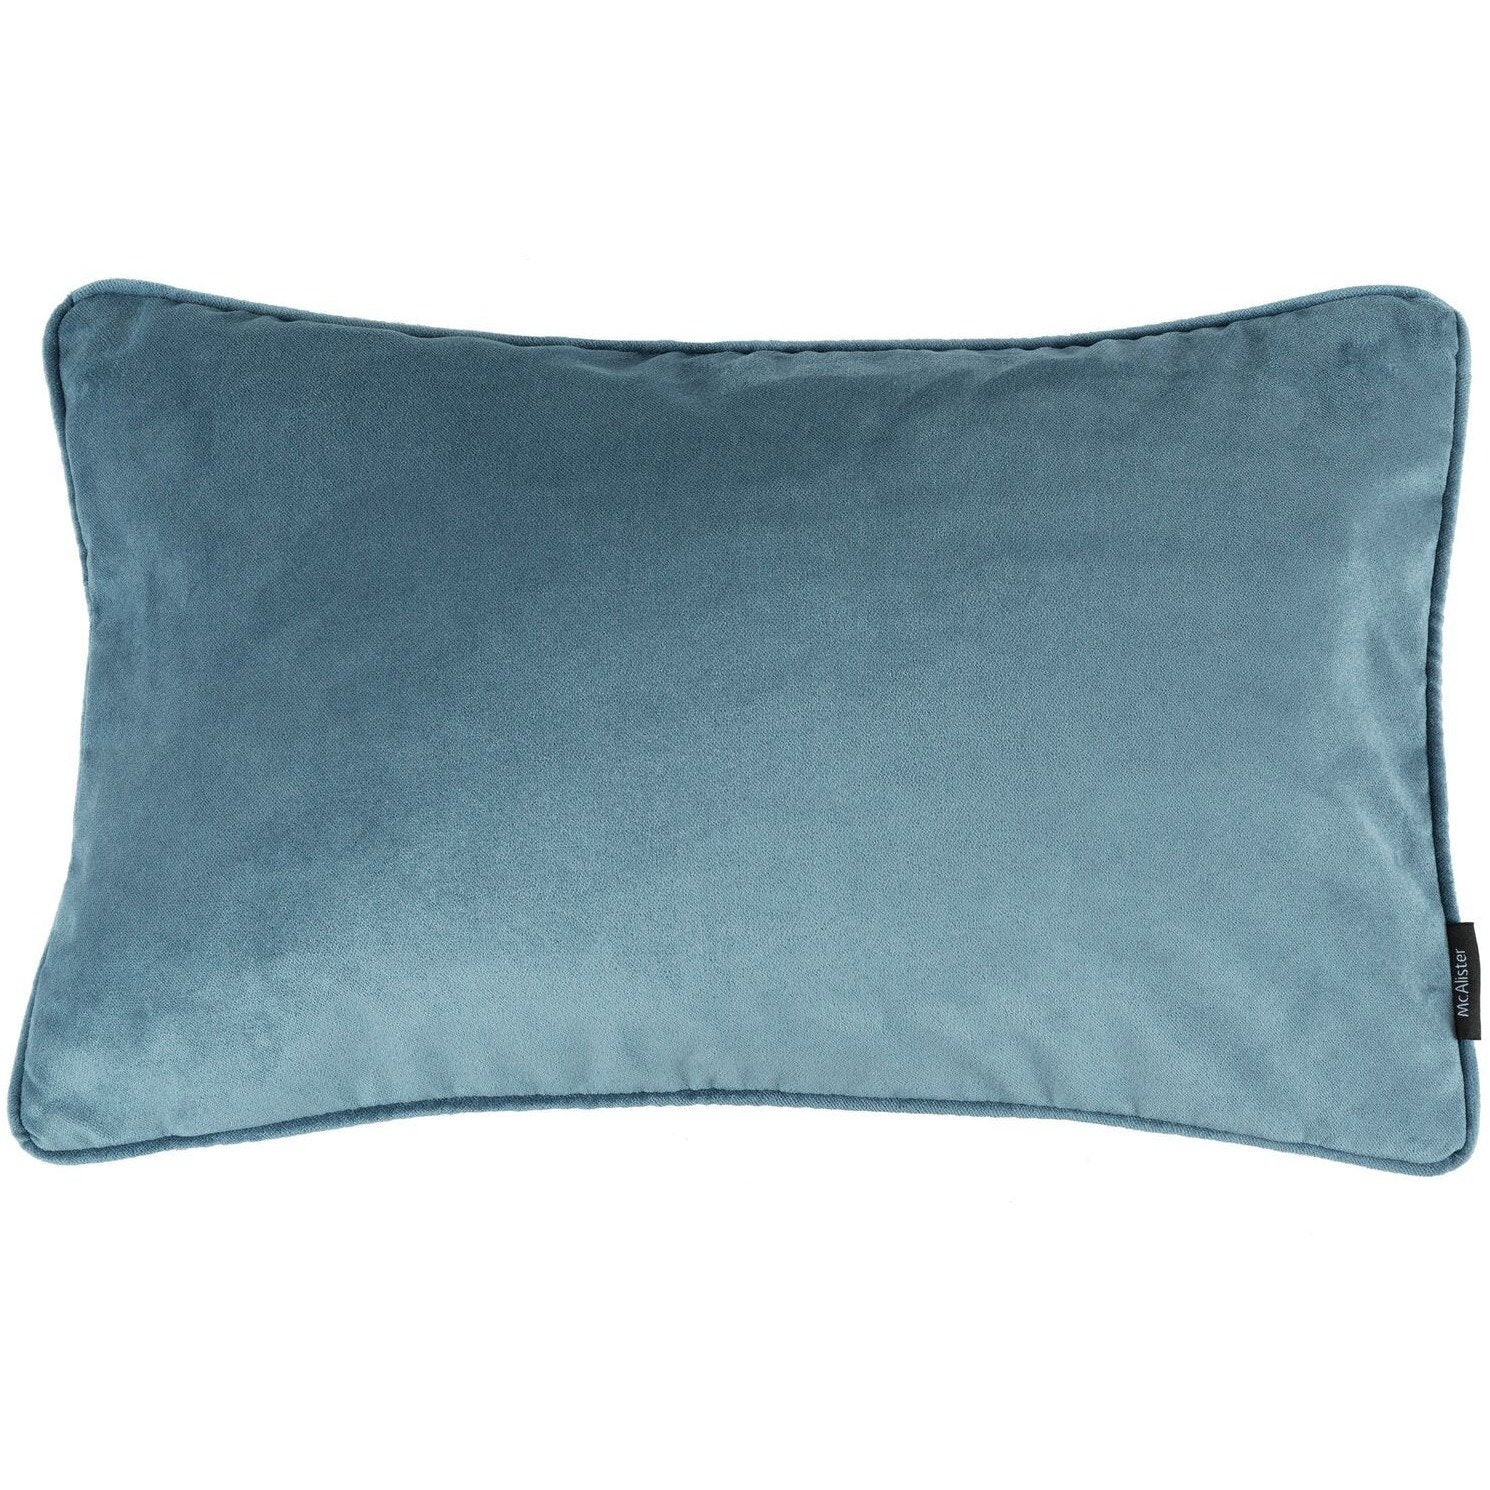 McAlister Textiles Matt Petrol Blue Velvet Cushion Cushions and Covers Cover Only 50cm x 30cm 